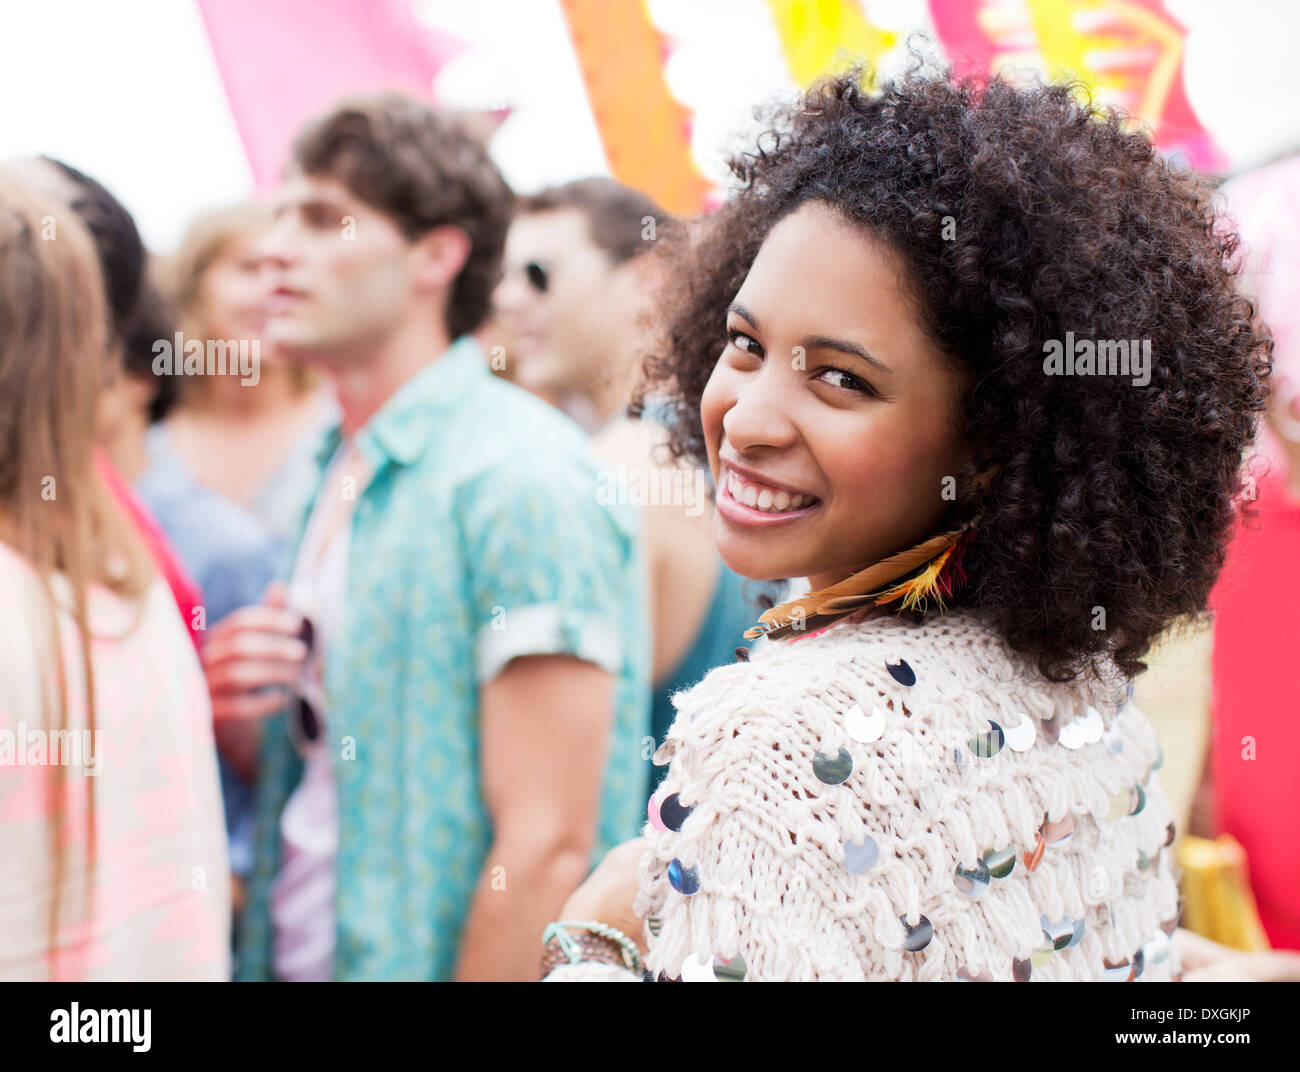 Portrait of smiling woman at music festival Stock Photo